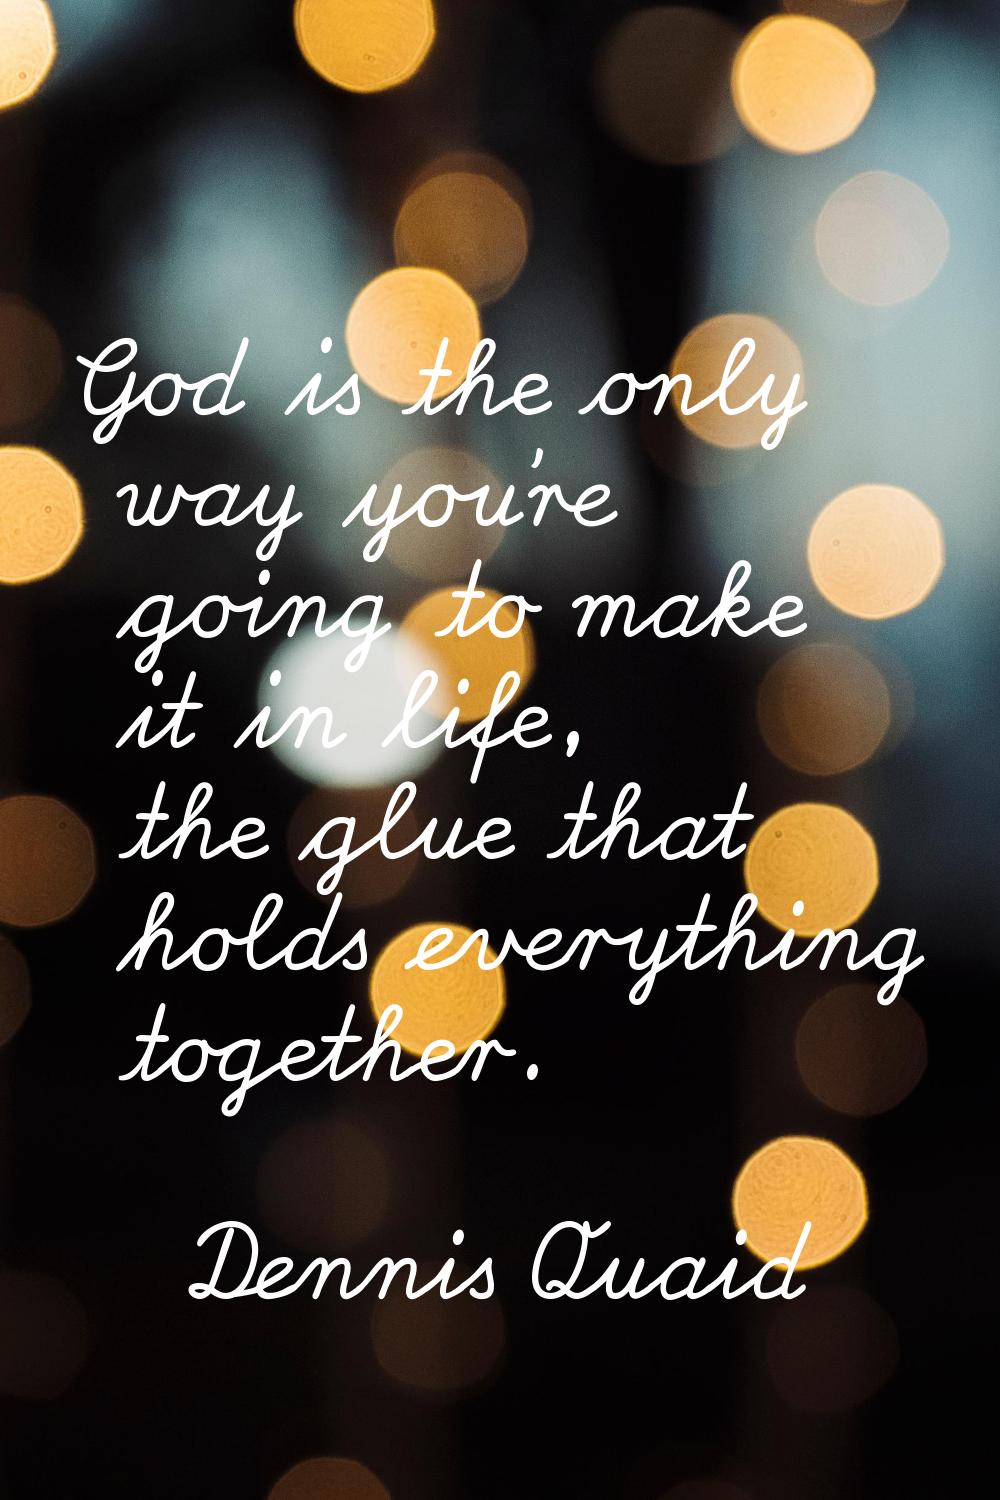 God is the only way you're going to make it in life, the glue that holds everything together.